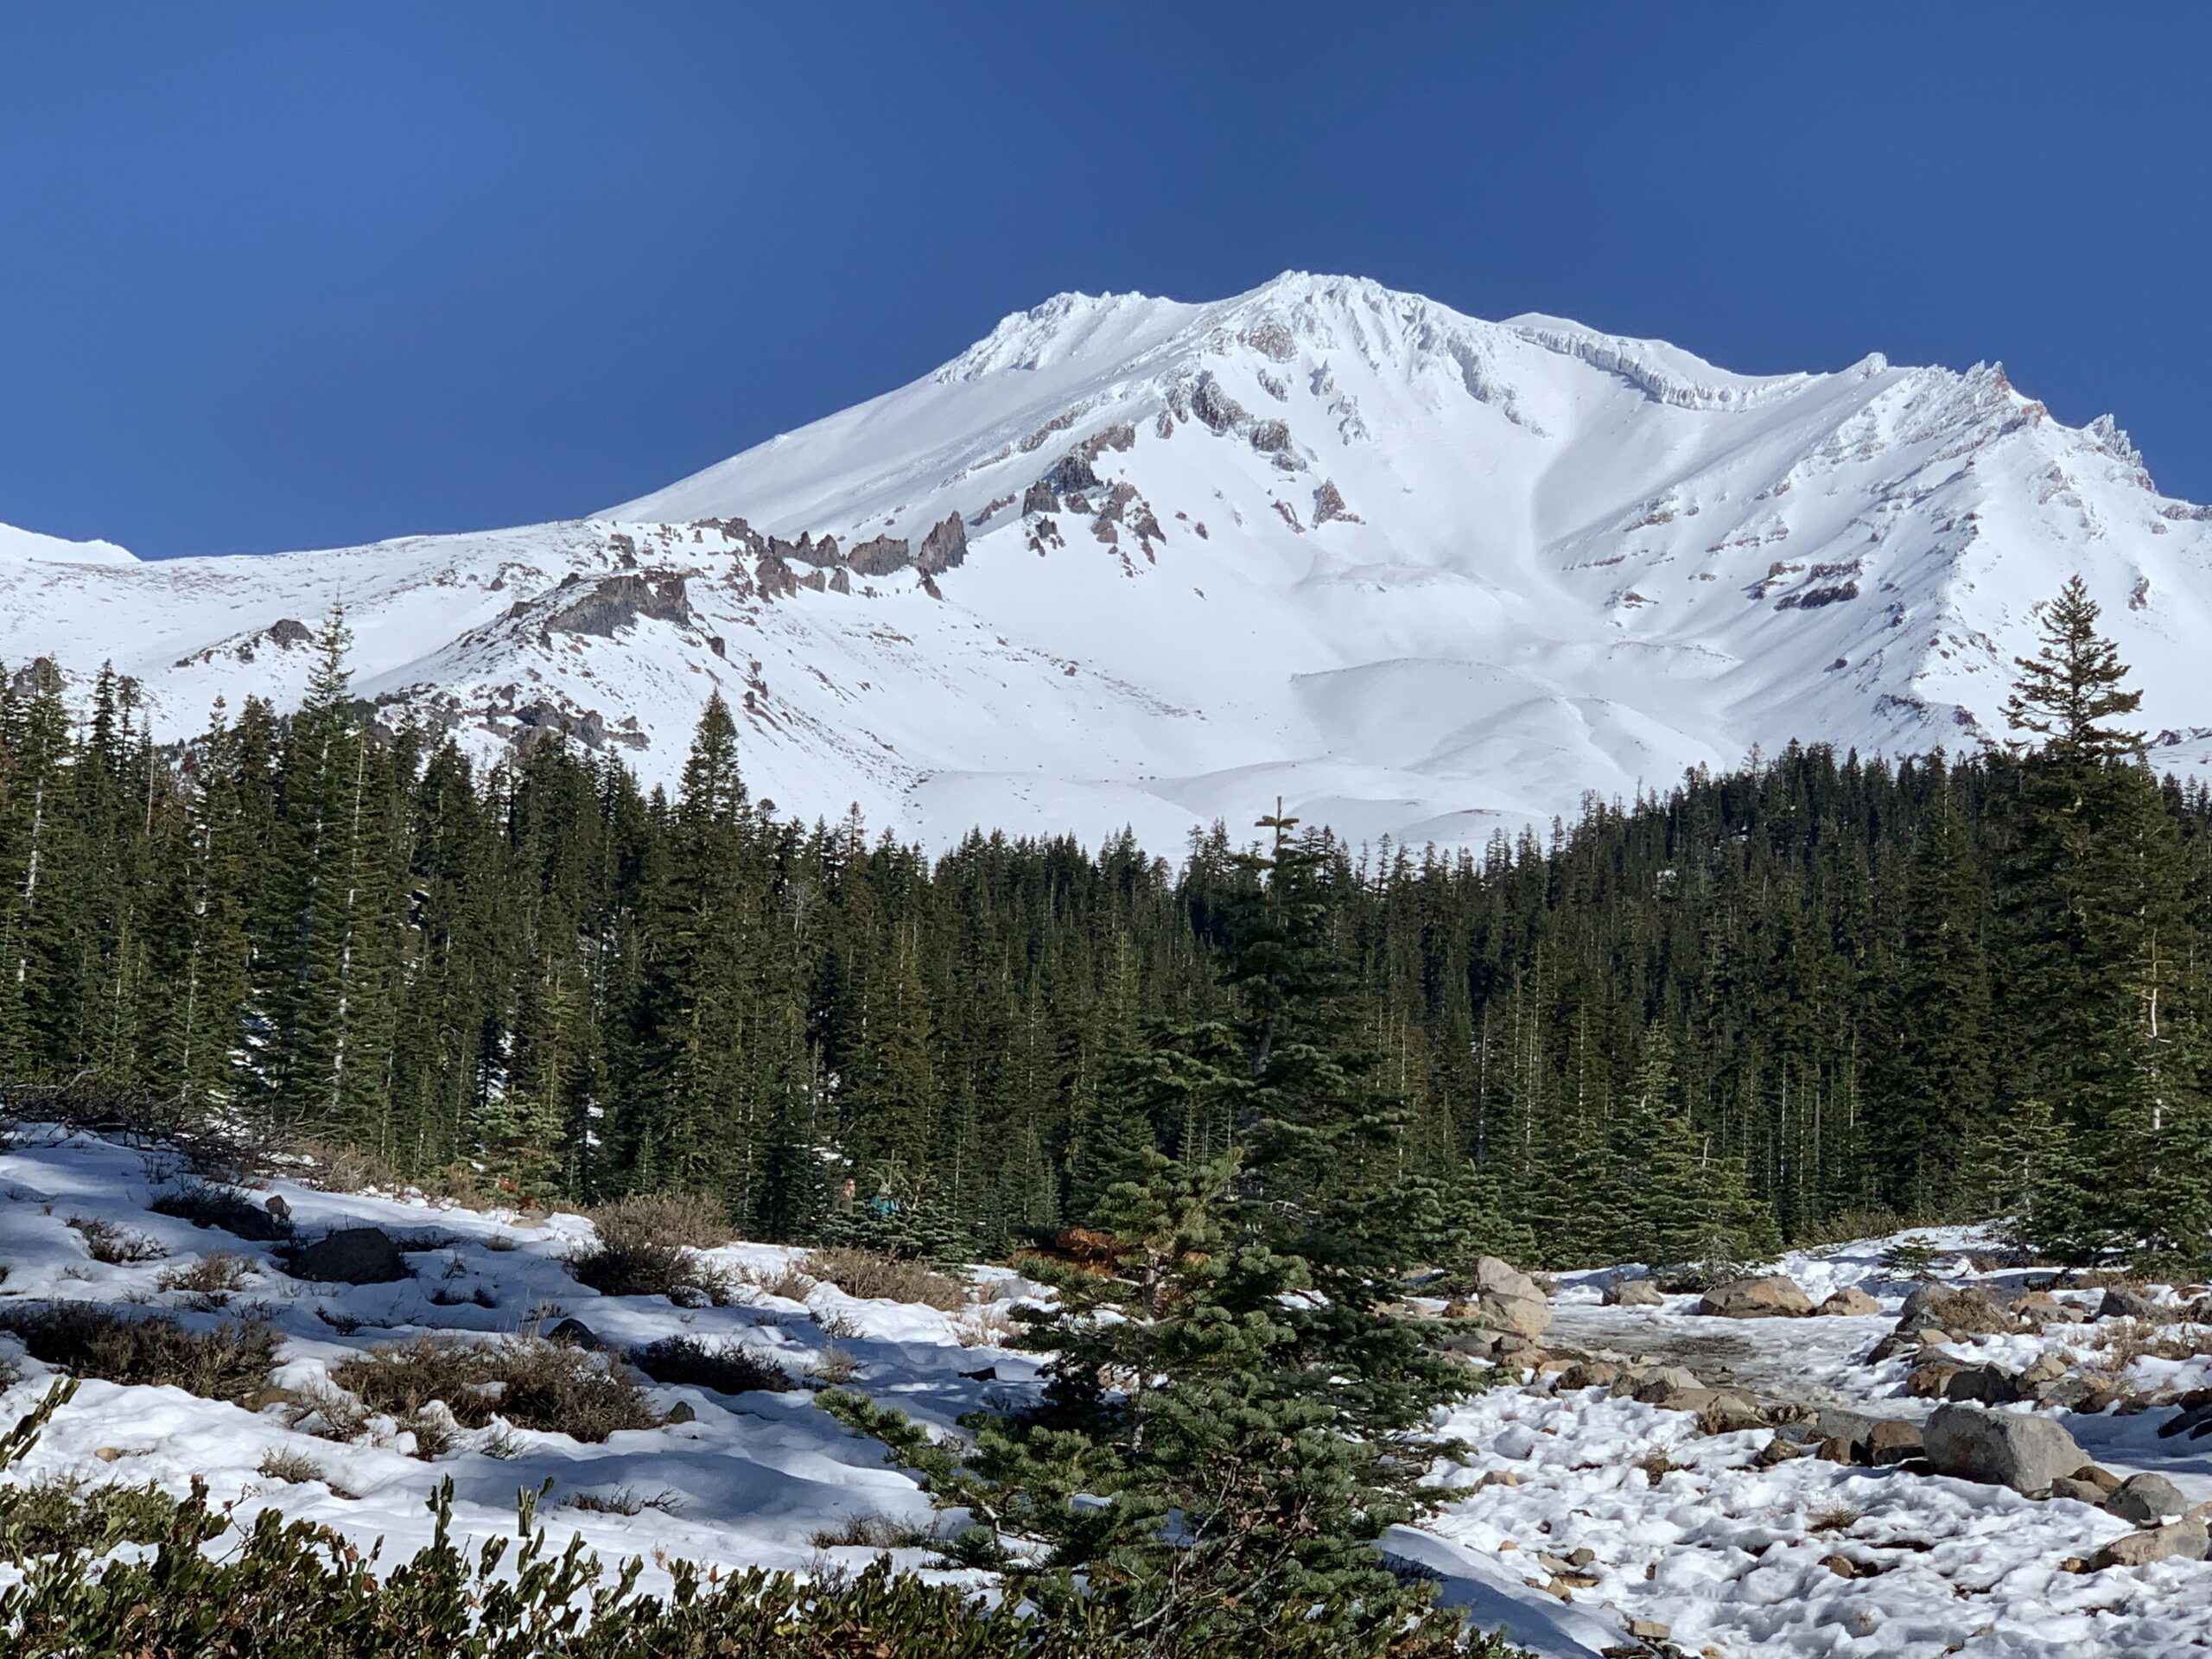 Are There Any Fees For Using Picnic Areas On Mount Shasta?